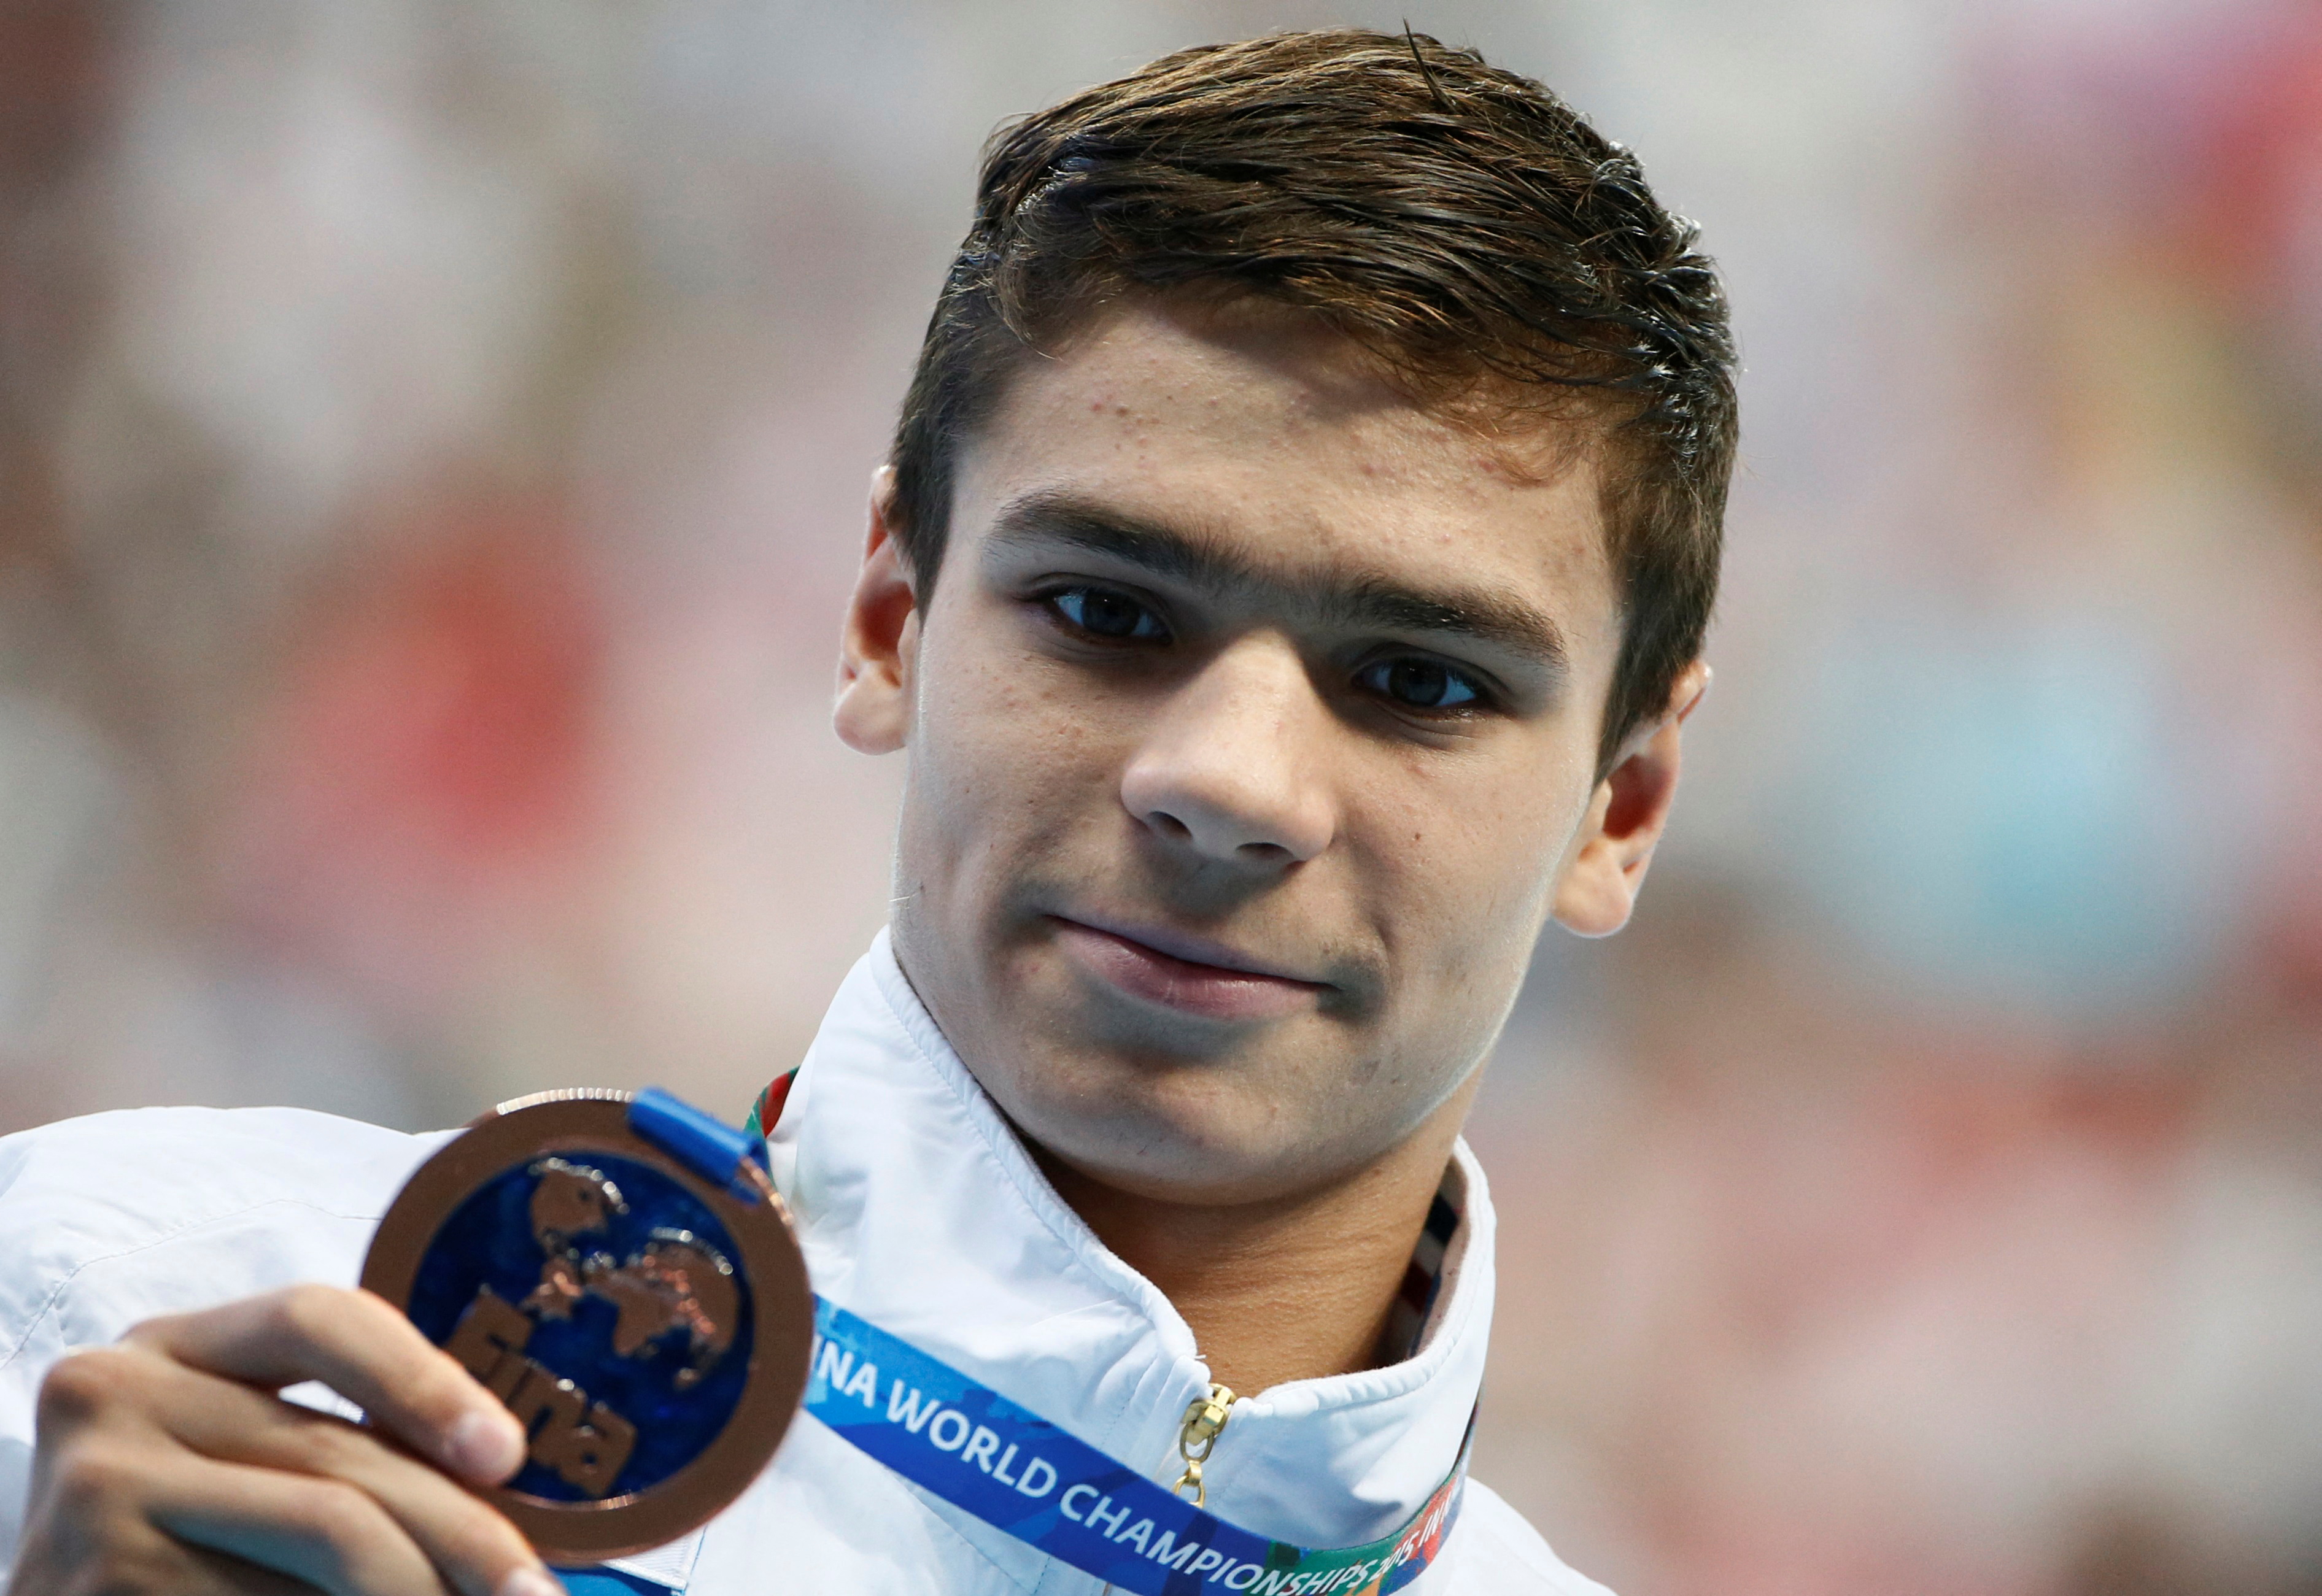 Russia's Rylov celebrates with bronze medal after men's 200m backstroke final at Aquatics World Championships in Kazan